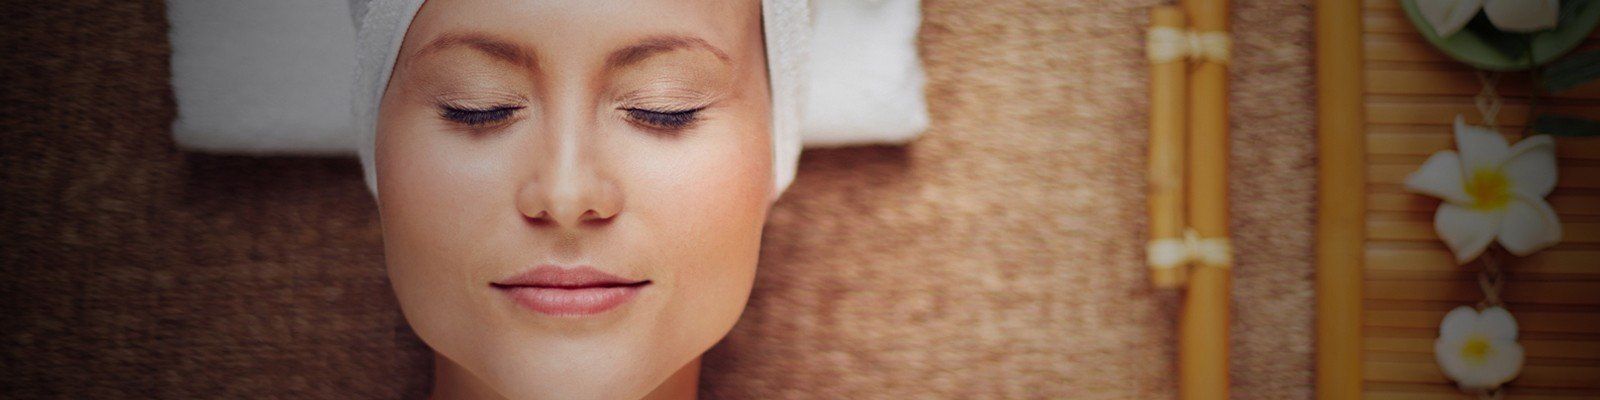 best of Facial Certified indianapolis relaxation